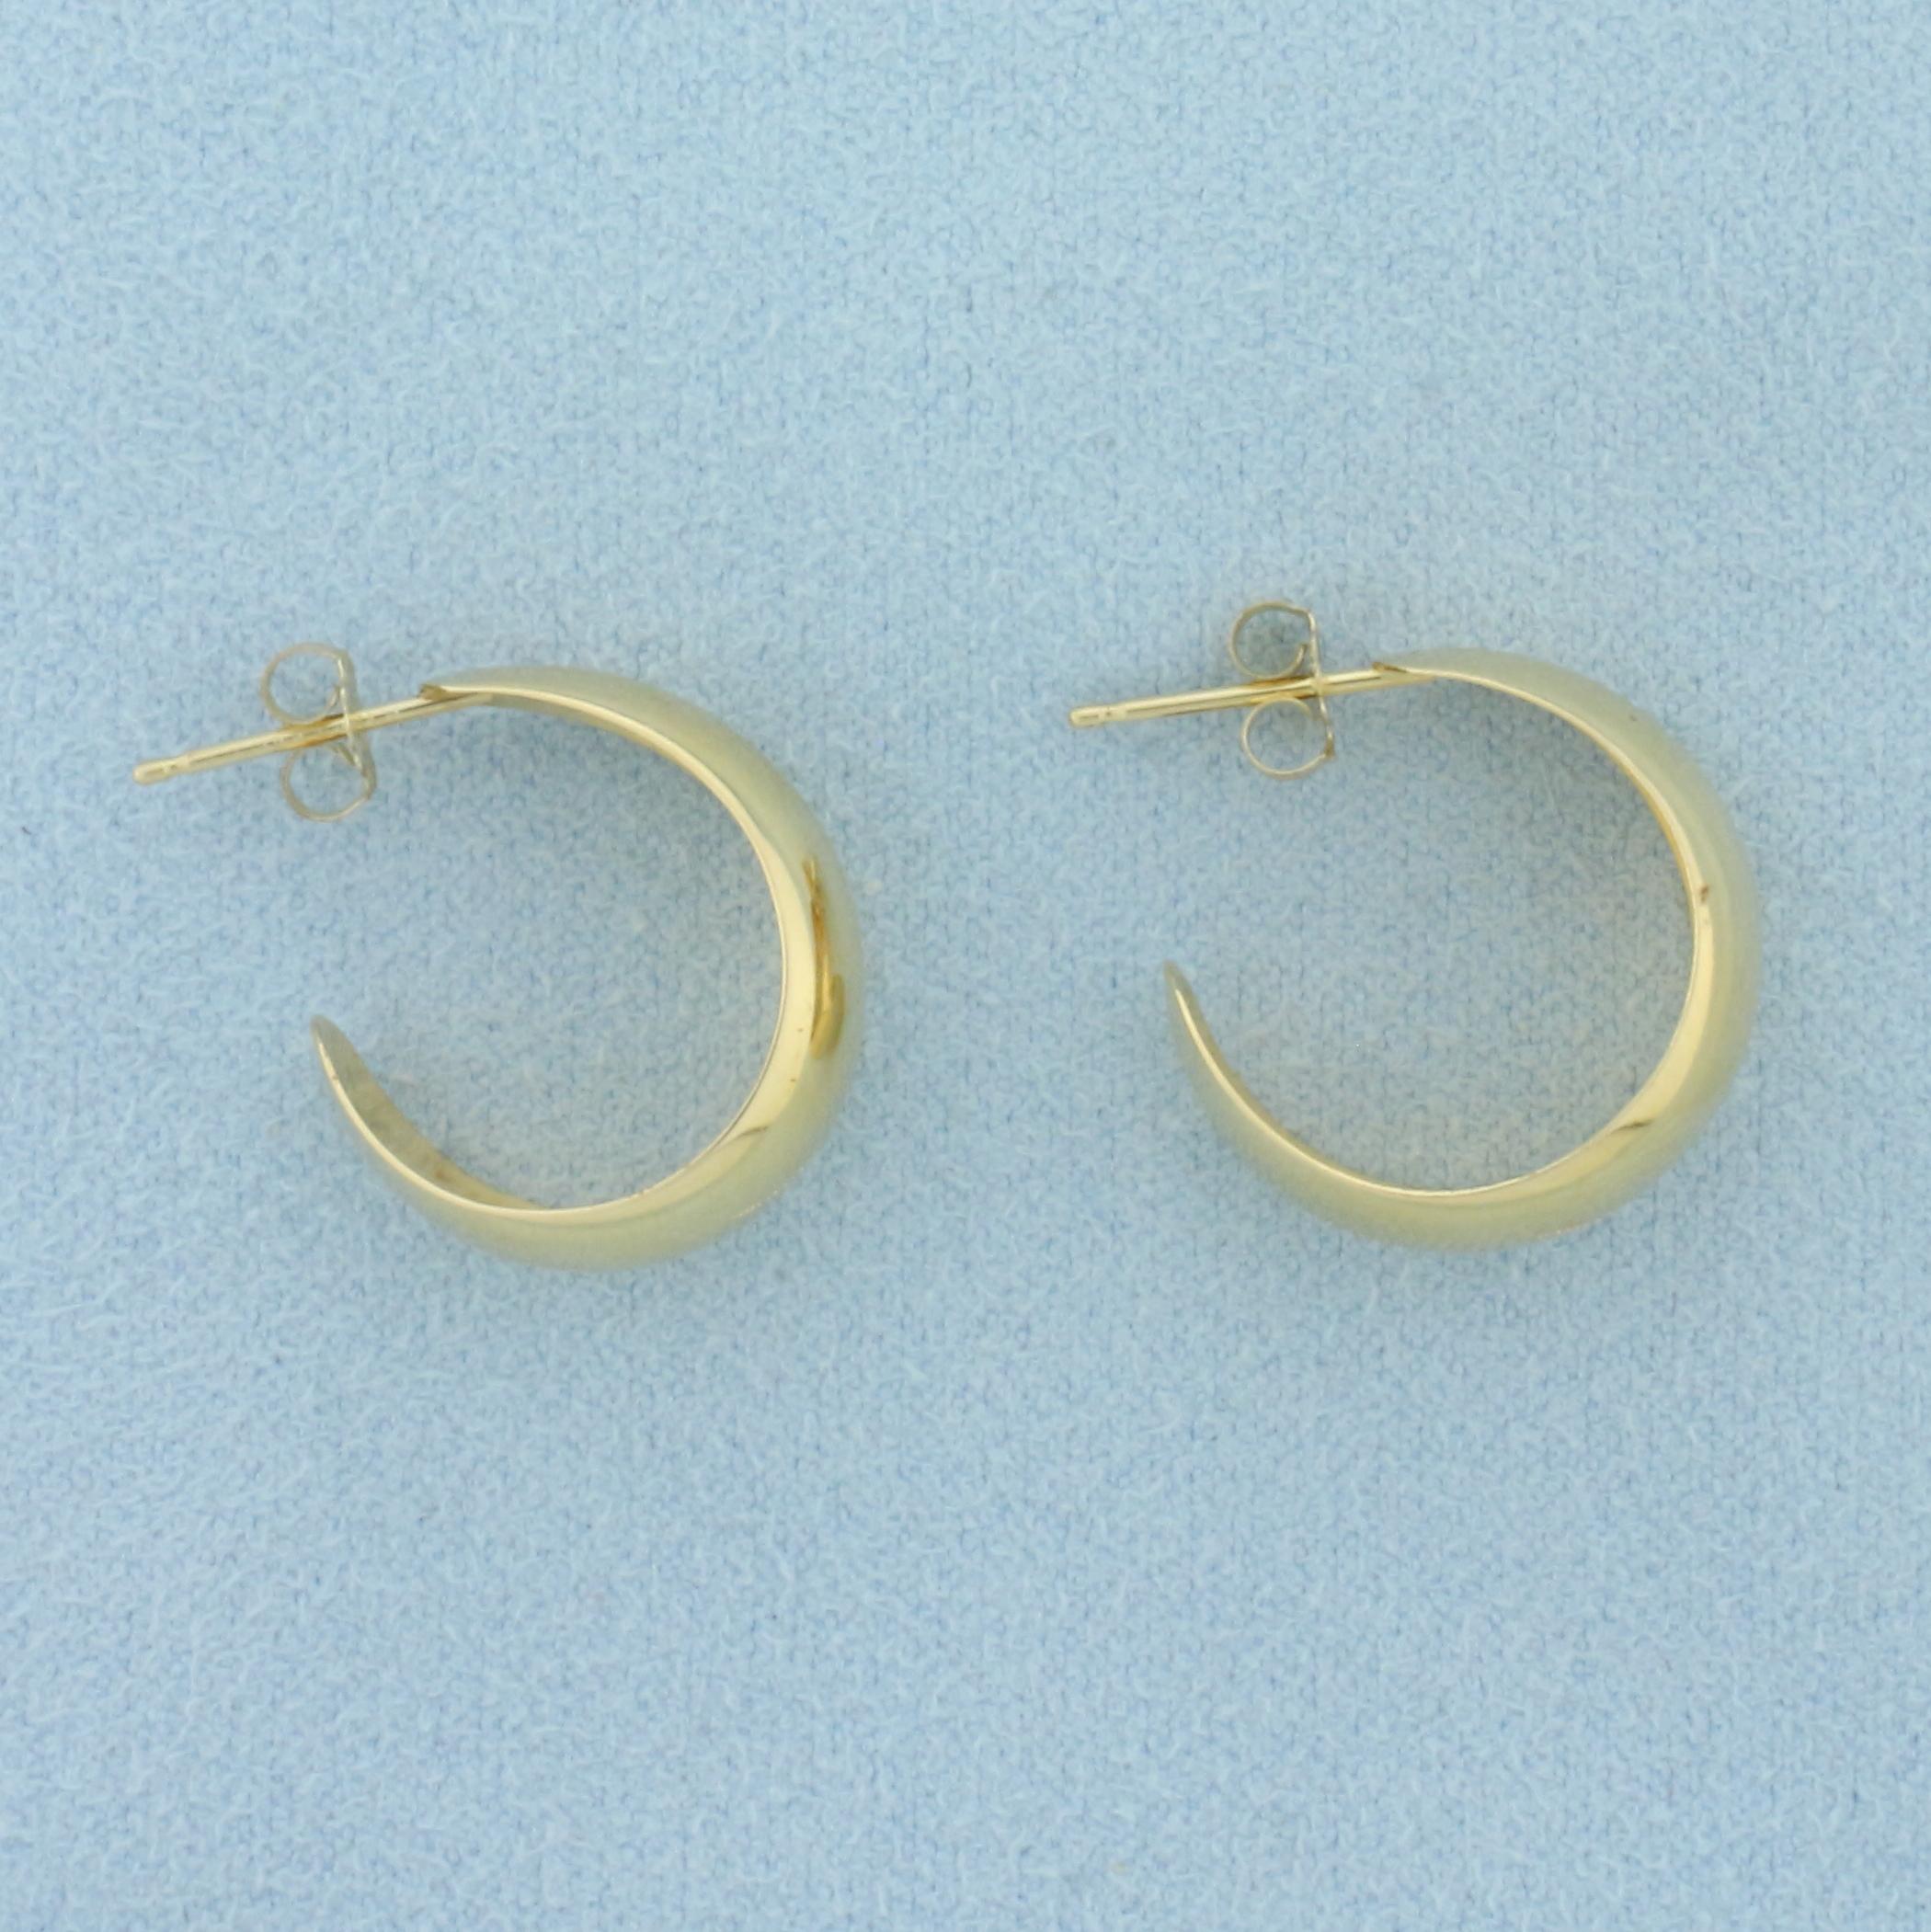 Etched Design Hoop Earrings In 14k Yellow Gold